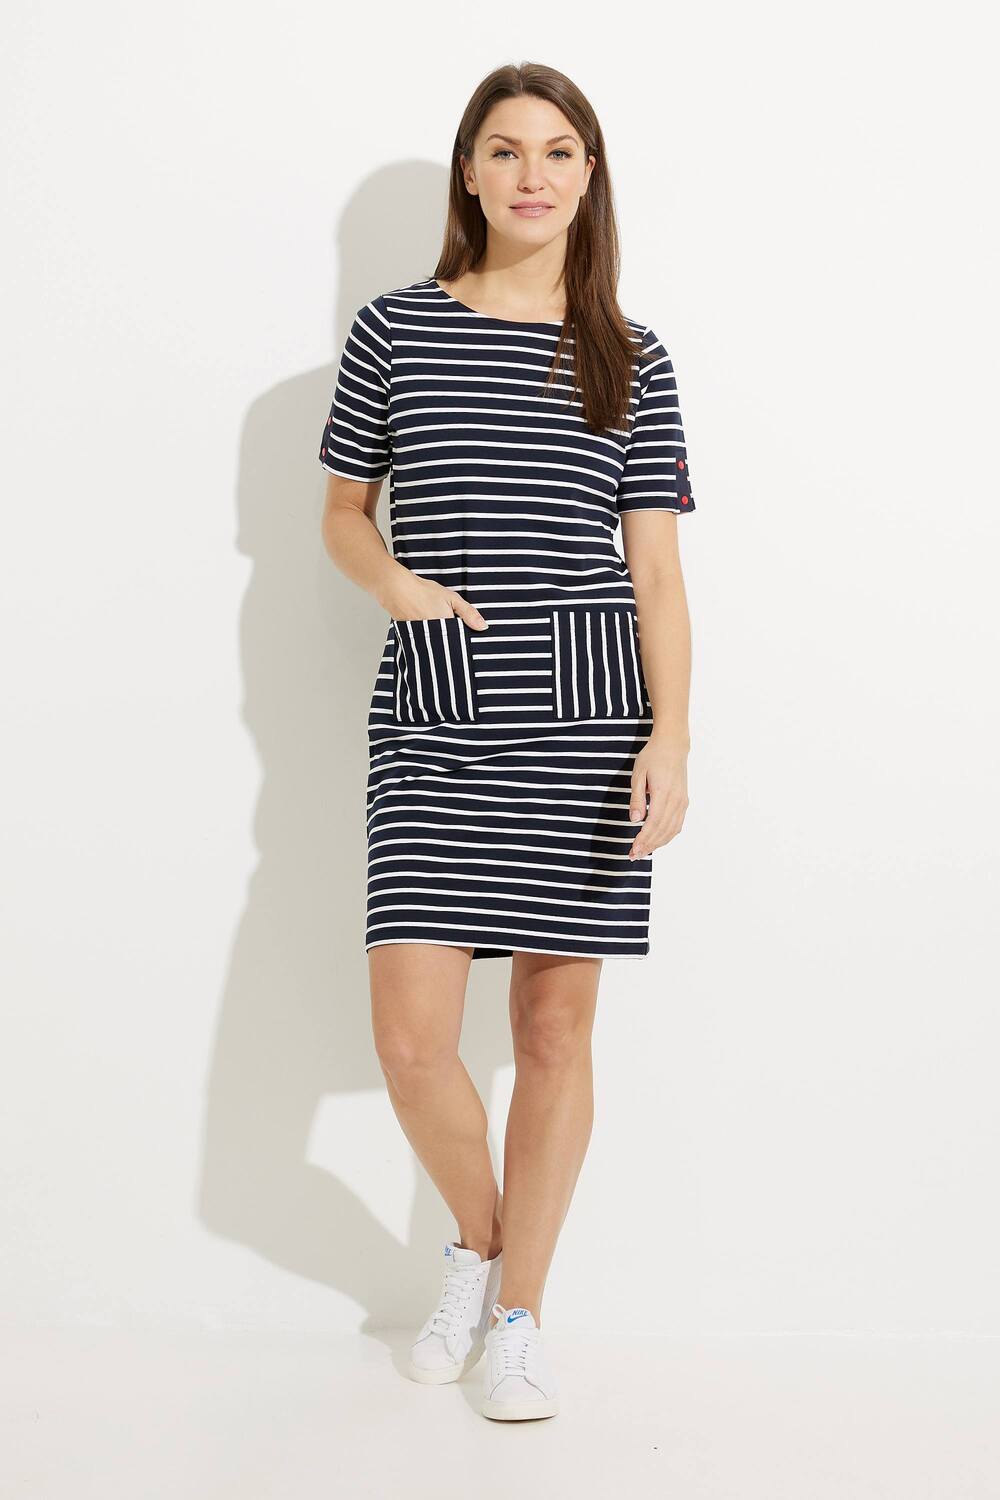 Mixed Striped Dress Style A41208 . Navy